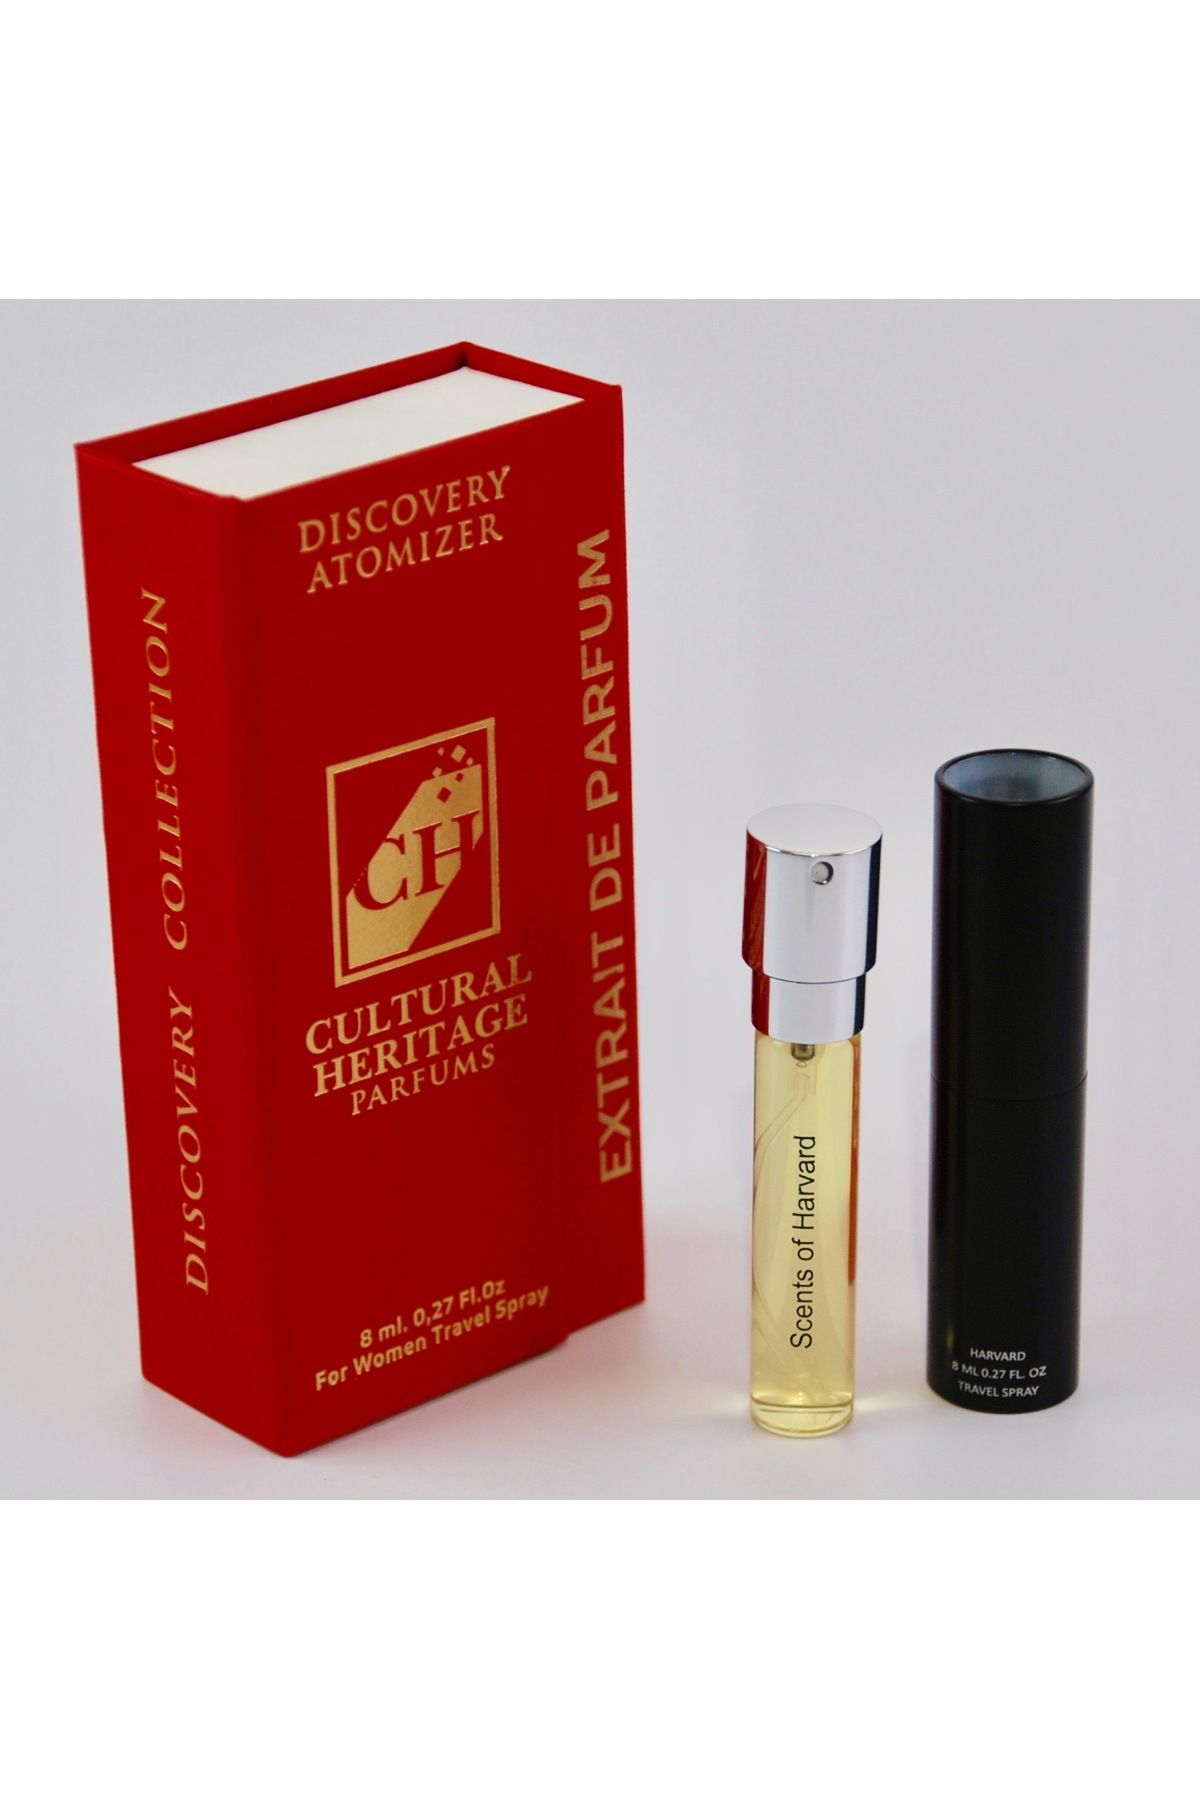 CH CULTURAL HERITAGE , Scents of Harvard Discovery Atomizer Travel Spray , For Women,